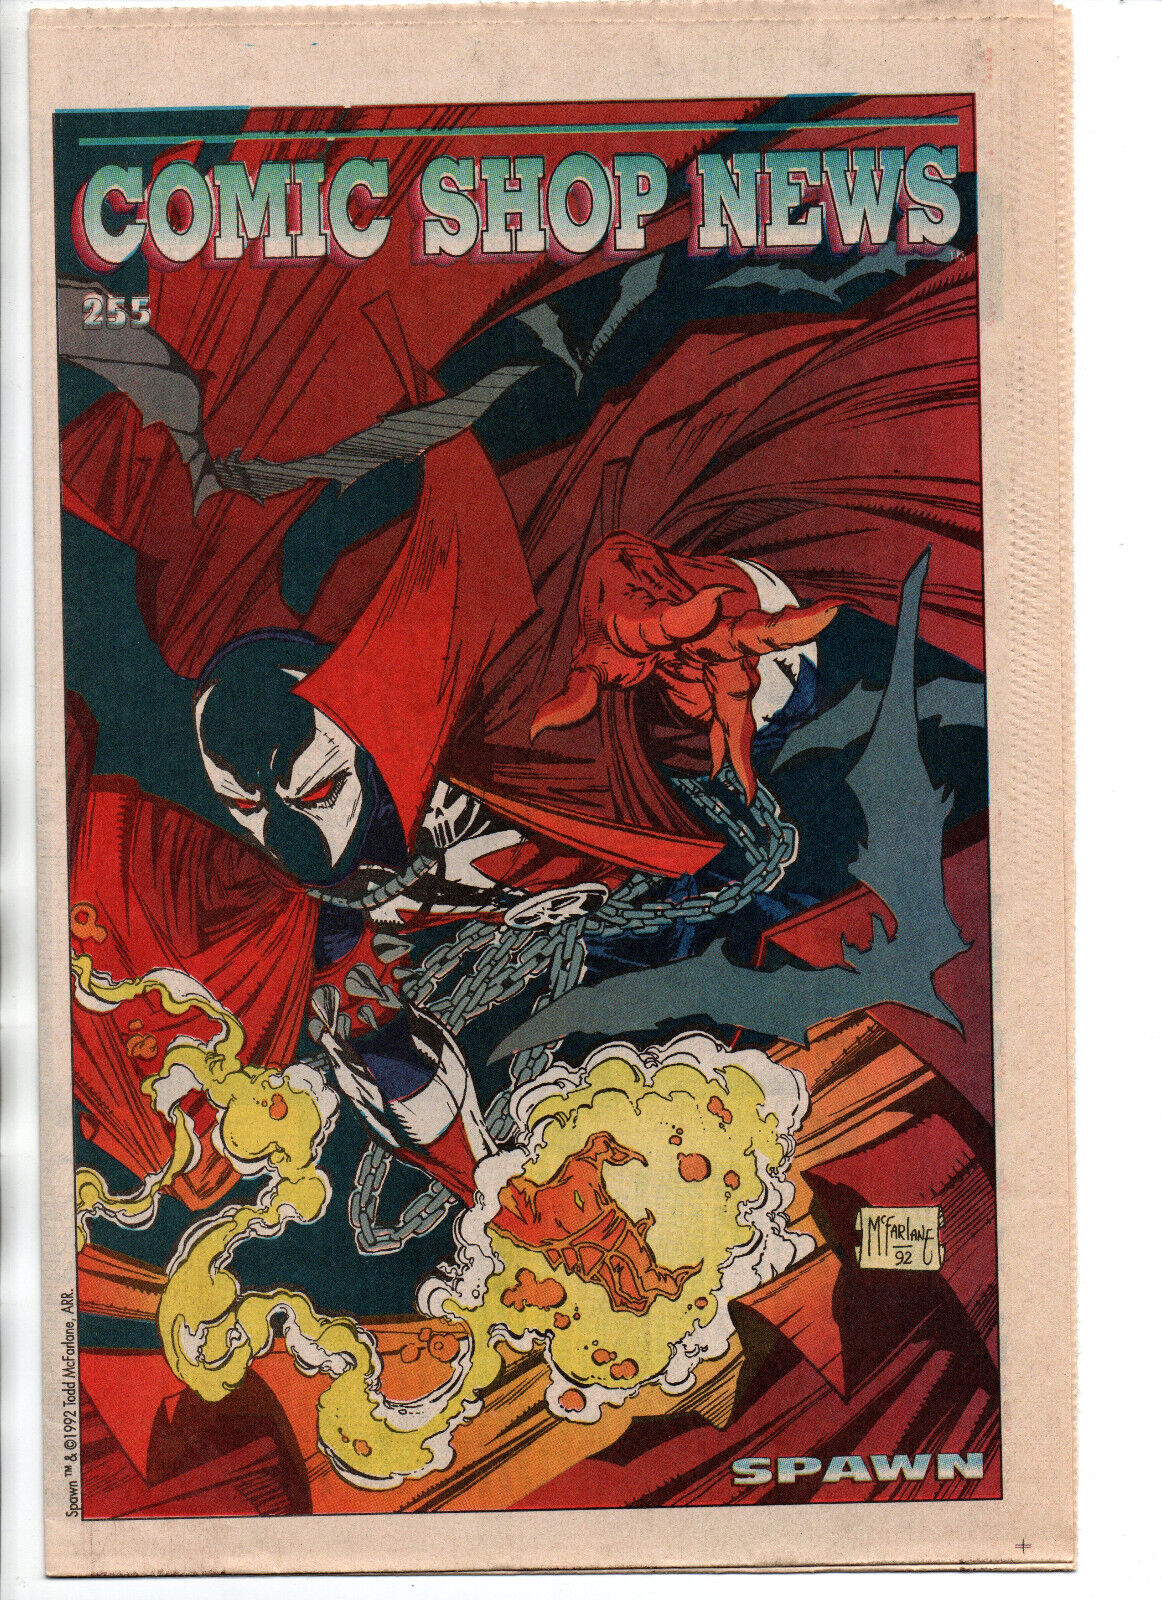 Comic Shop News 255 - Spawn Preview Cover - 1992